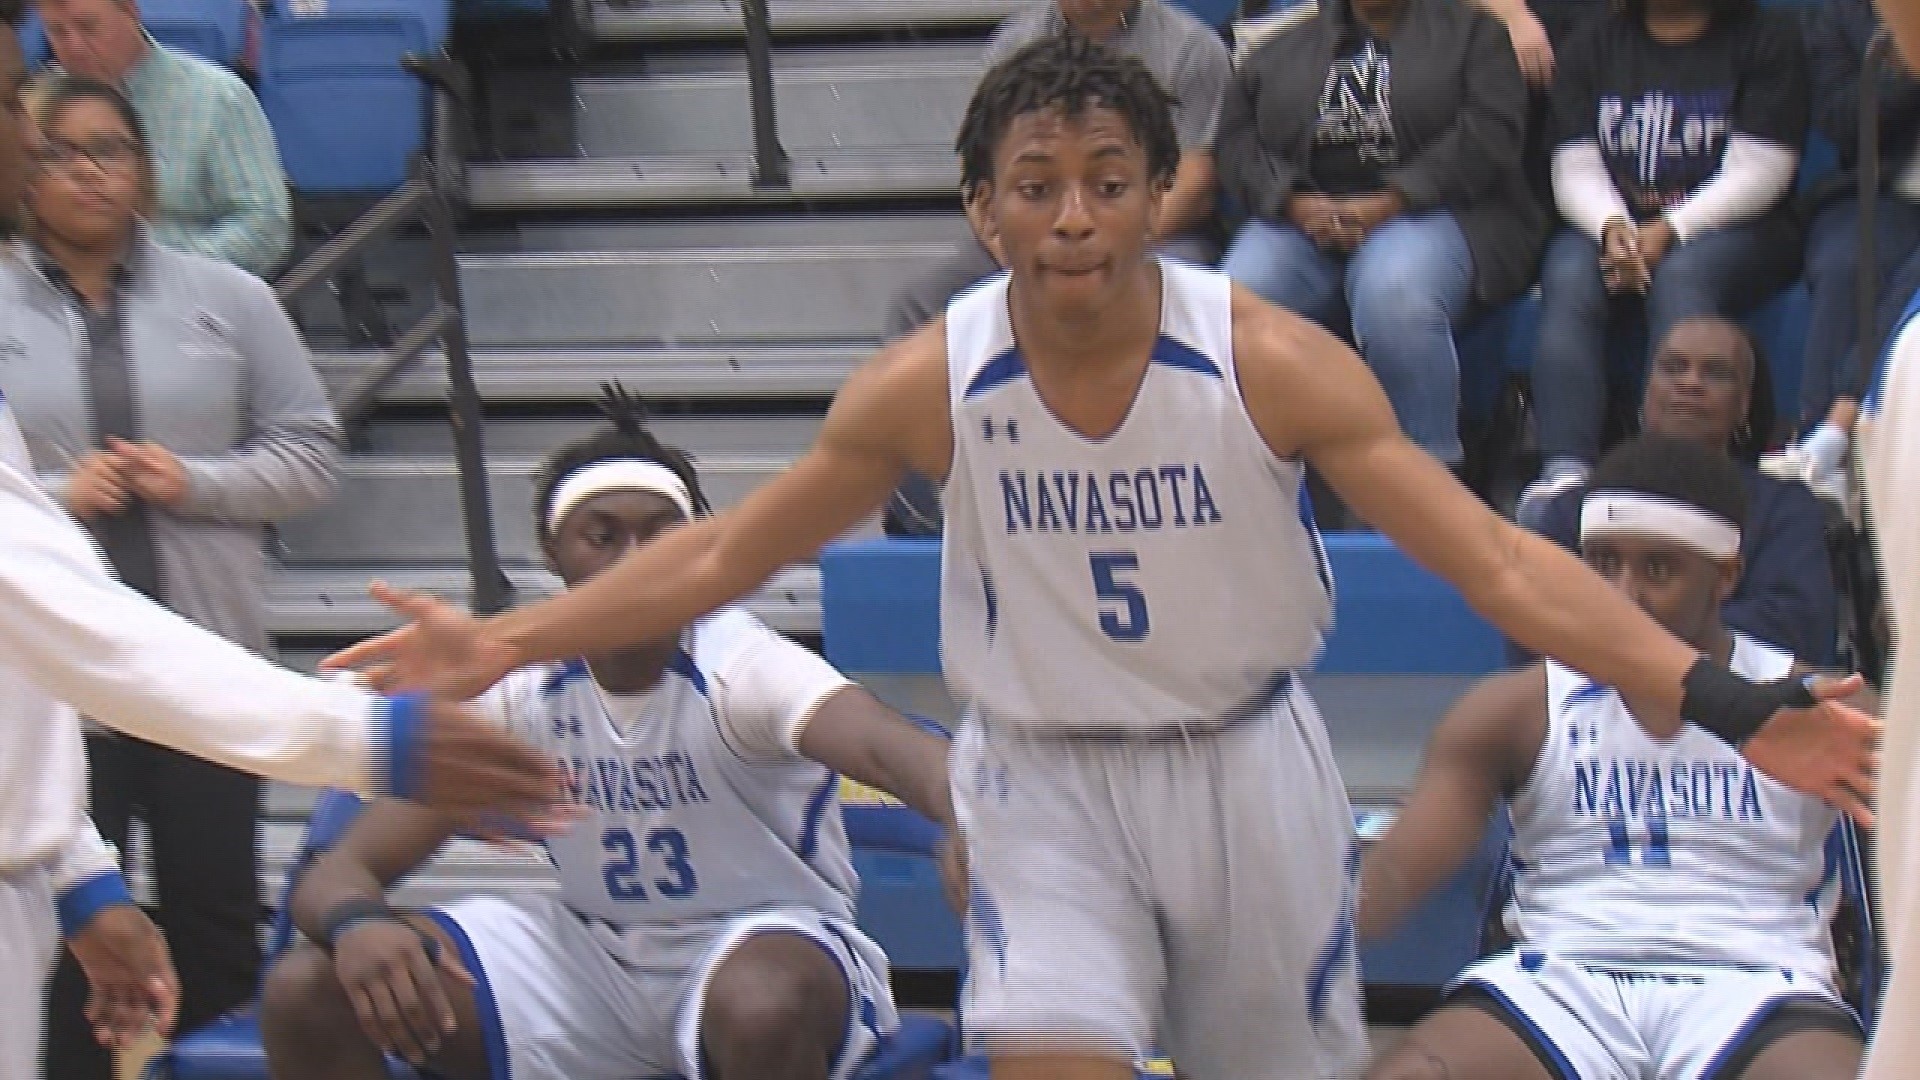 Navasota and Hearne are both moving on to the Regional Finals